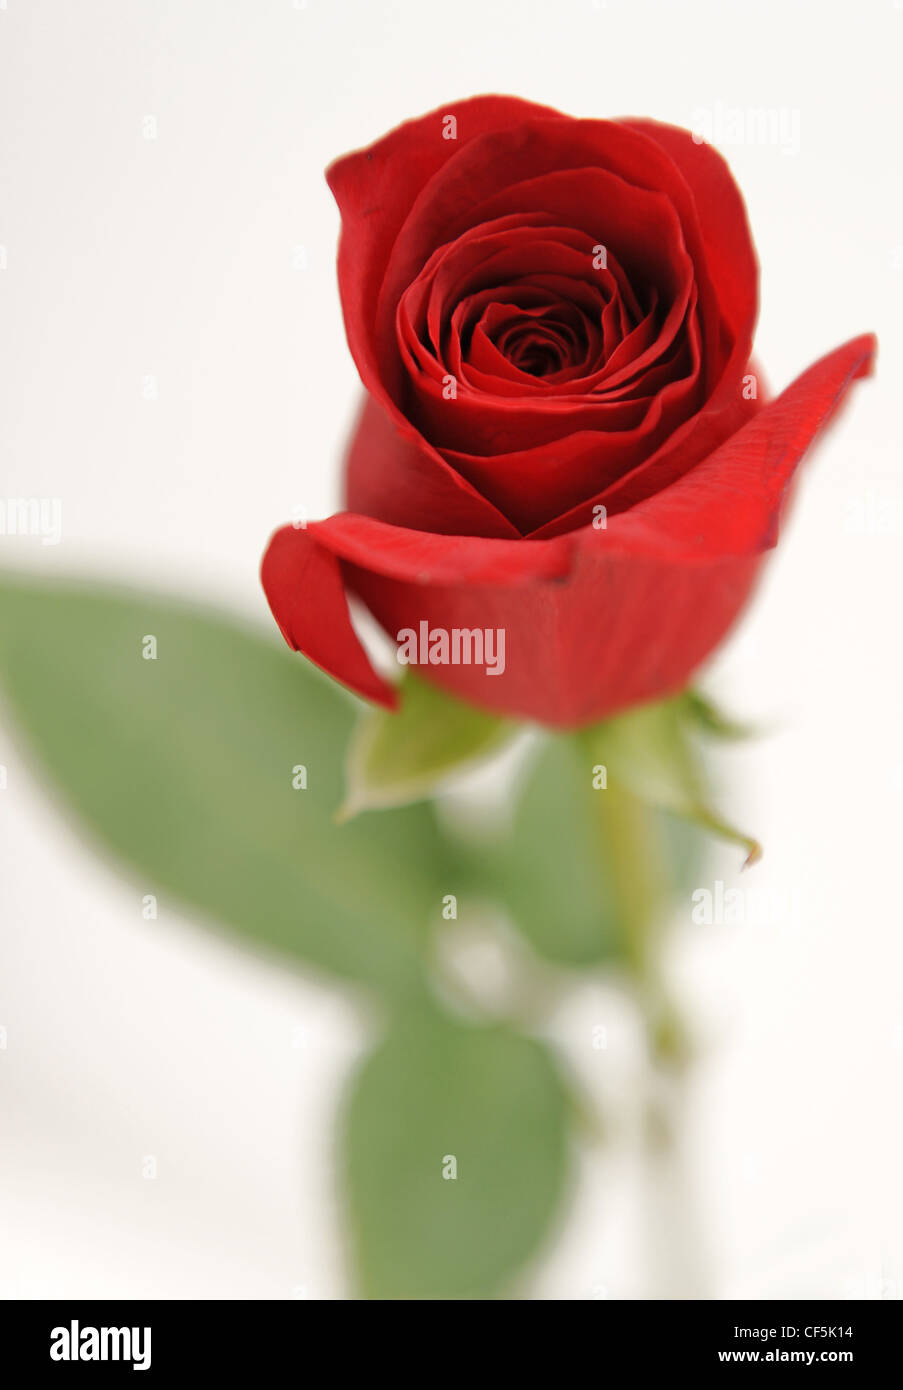 A still life image of red rose with stem and leaves out of focus and red petals in focus Stock Photo